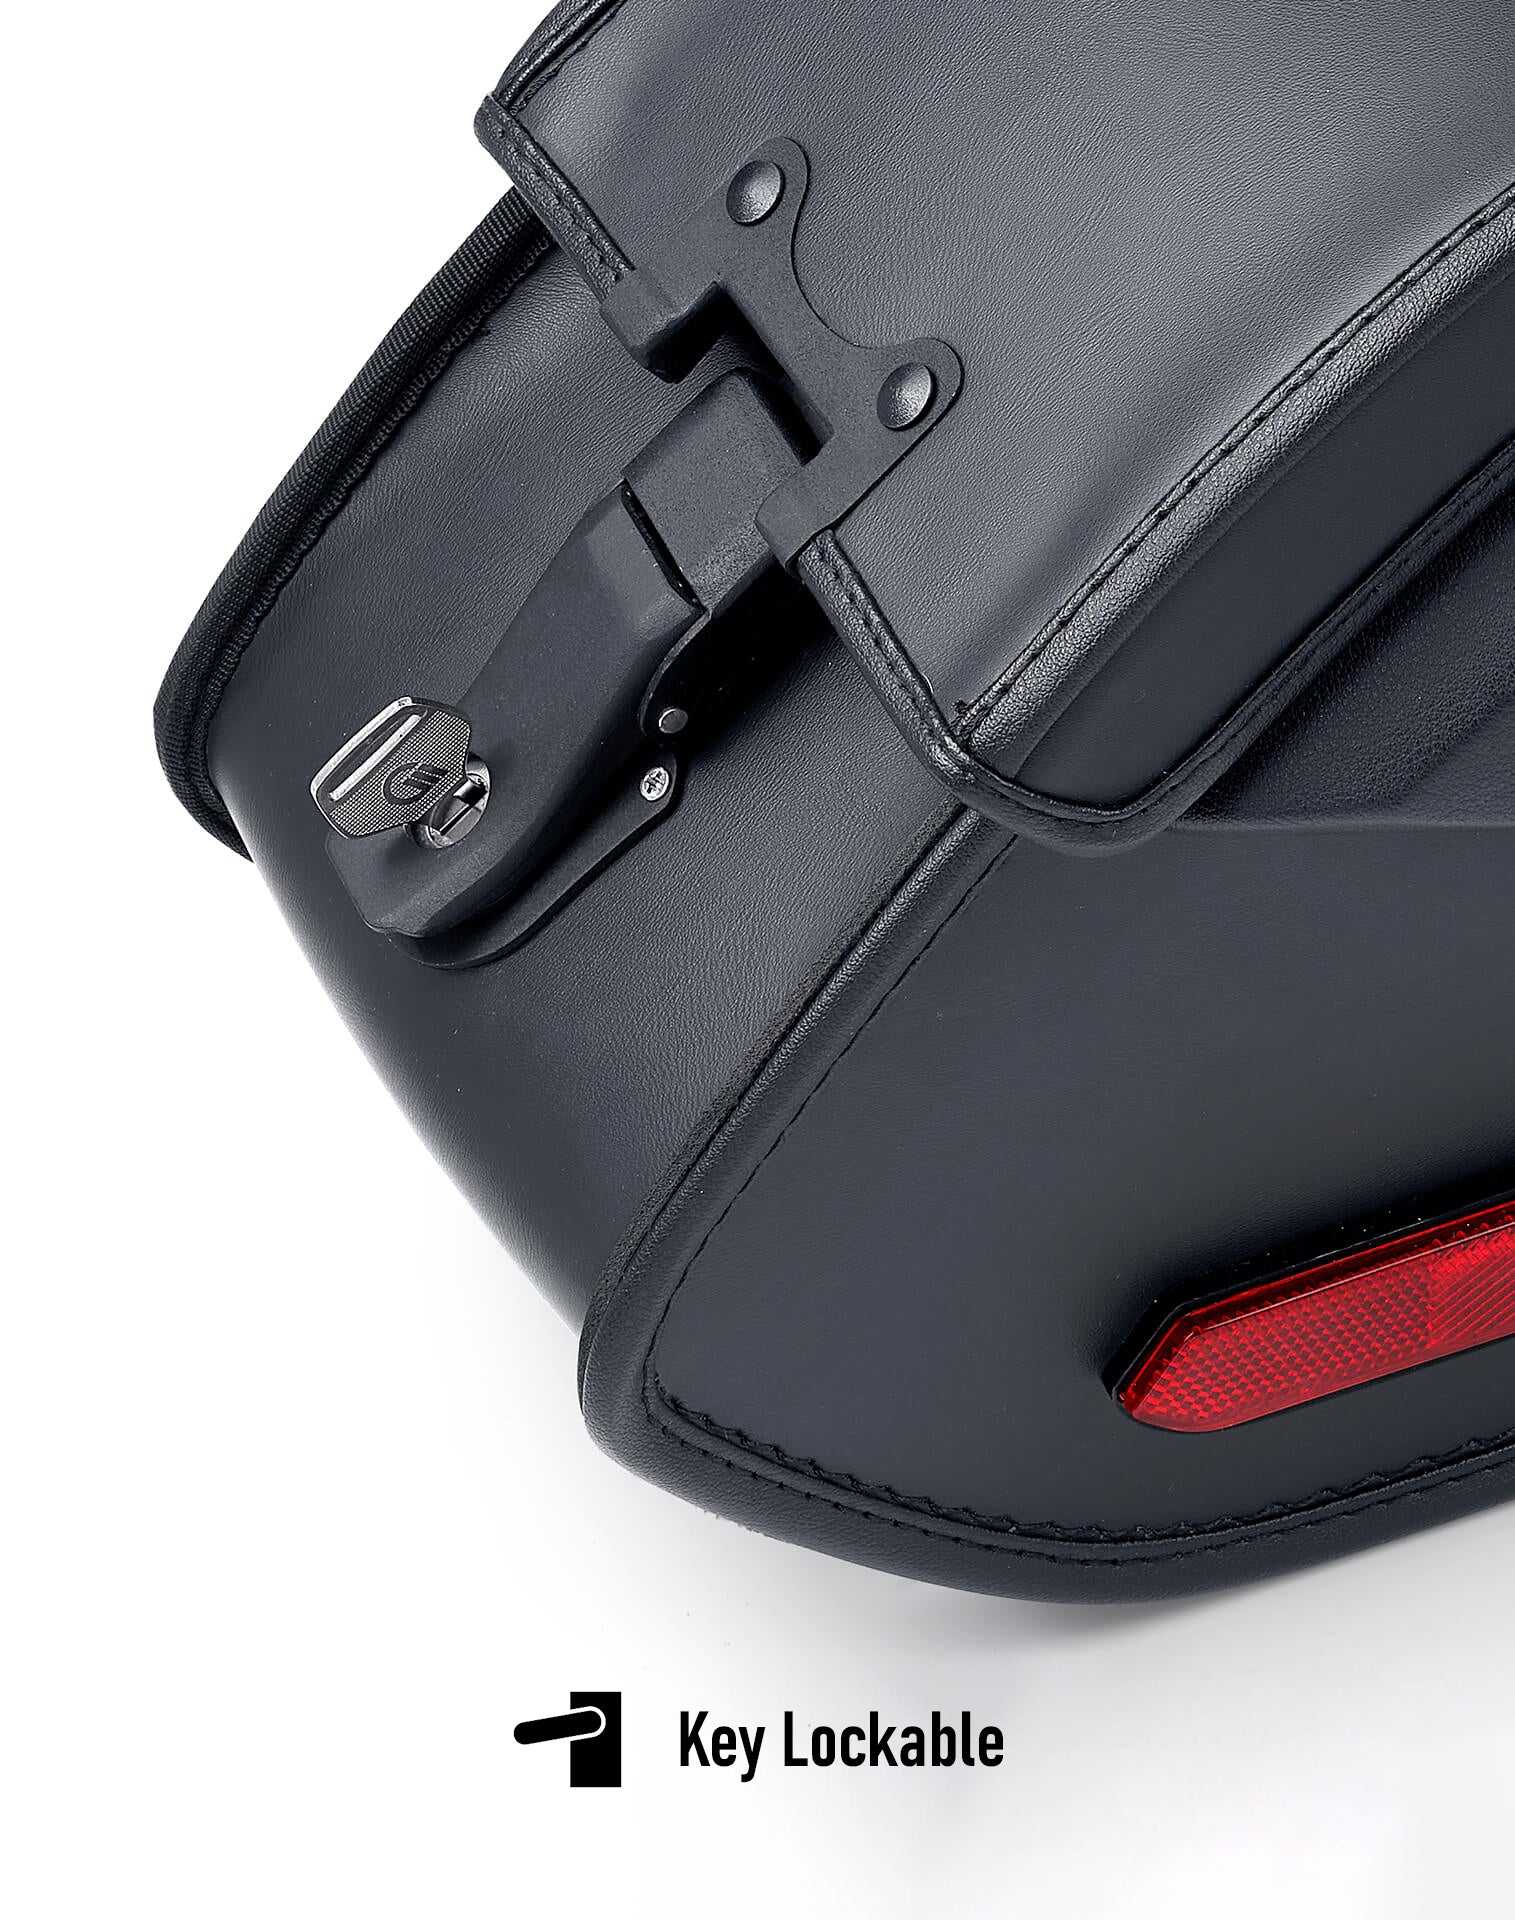 Viking Aviator Large Honda 1500 Valkyrie Interstate Leather Motorcycle Saddlebags are Durable